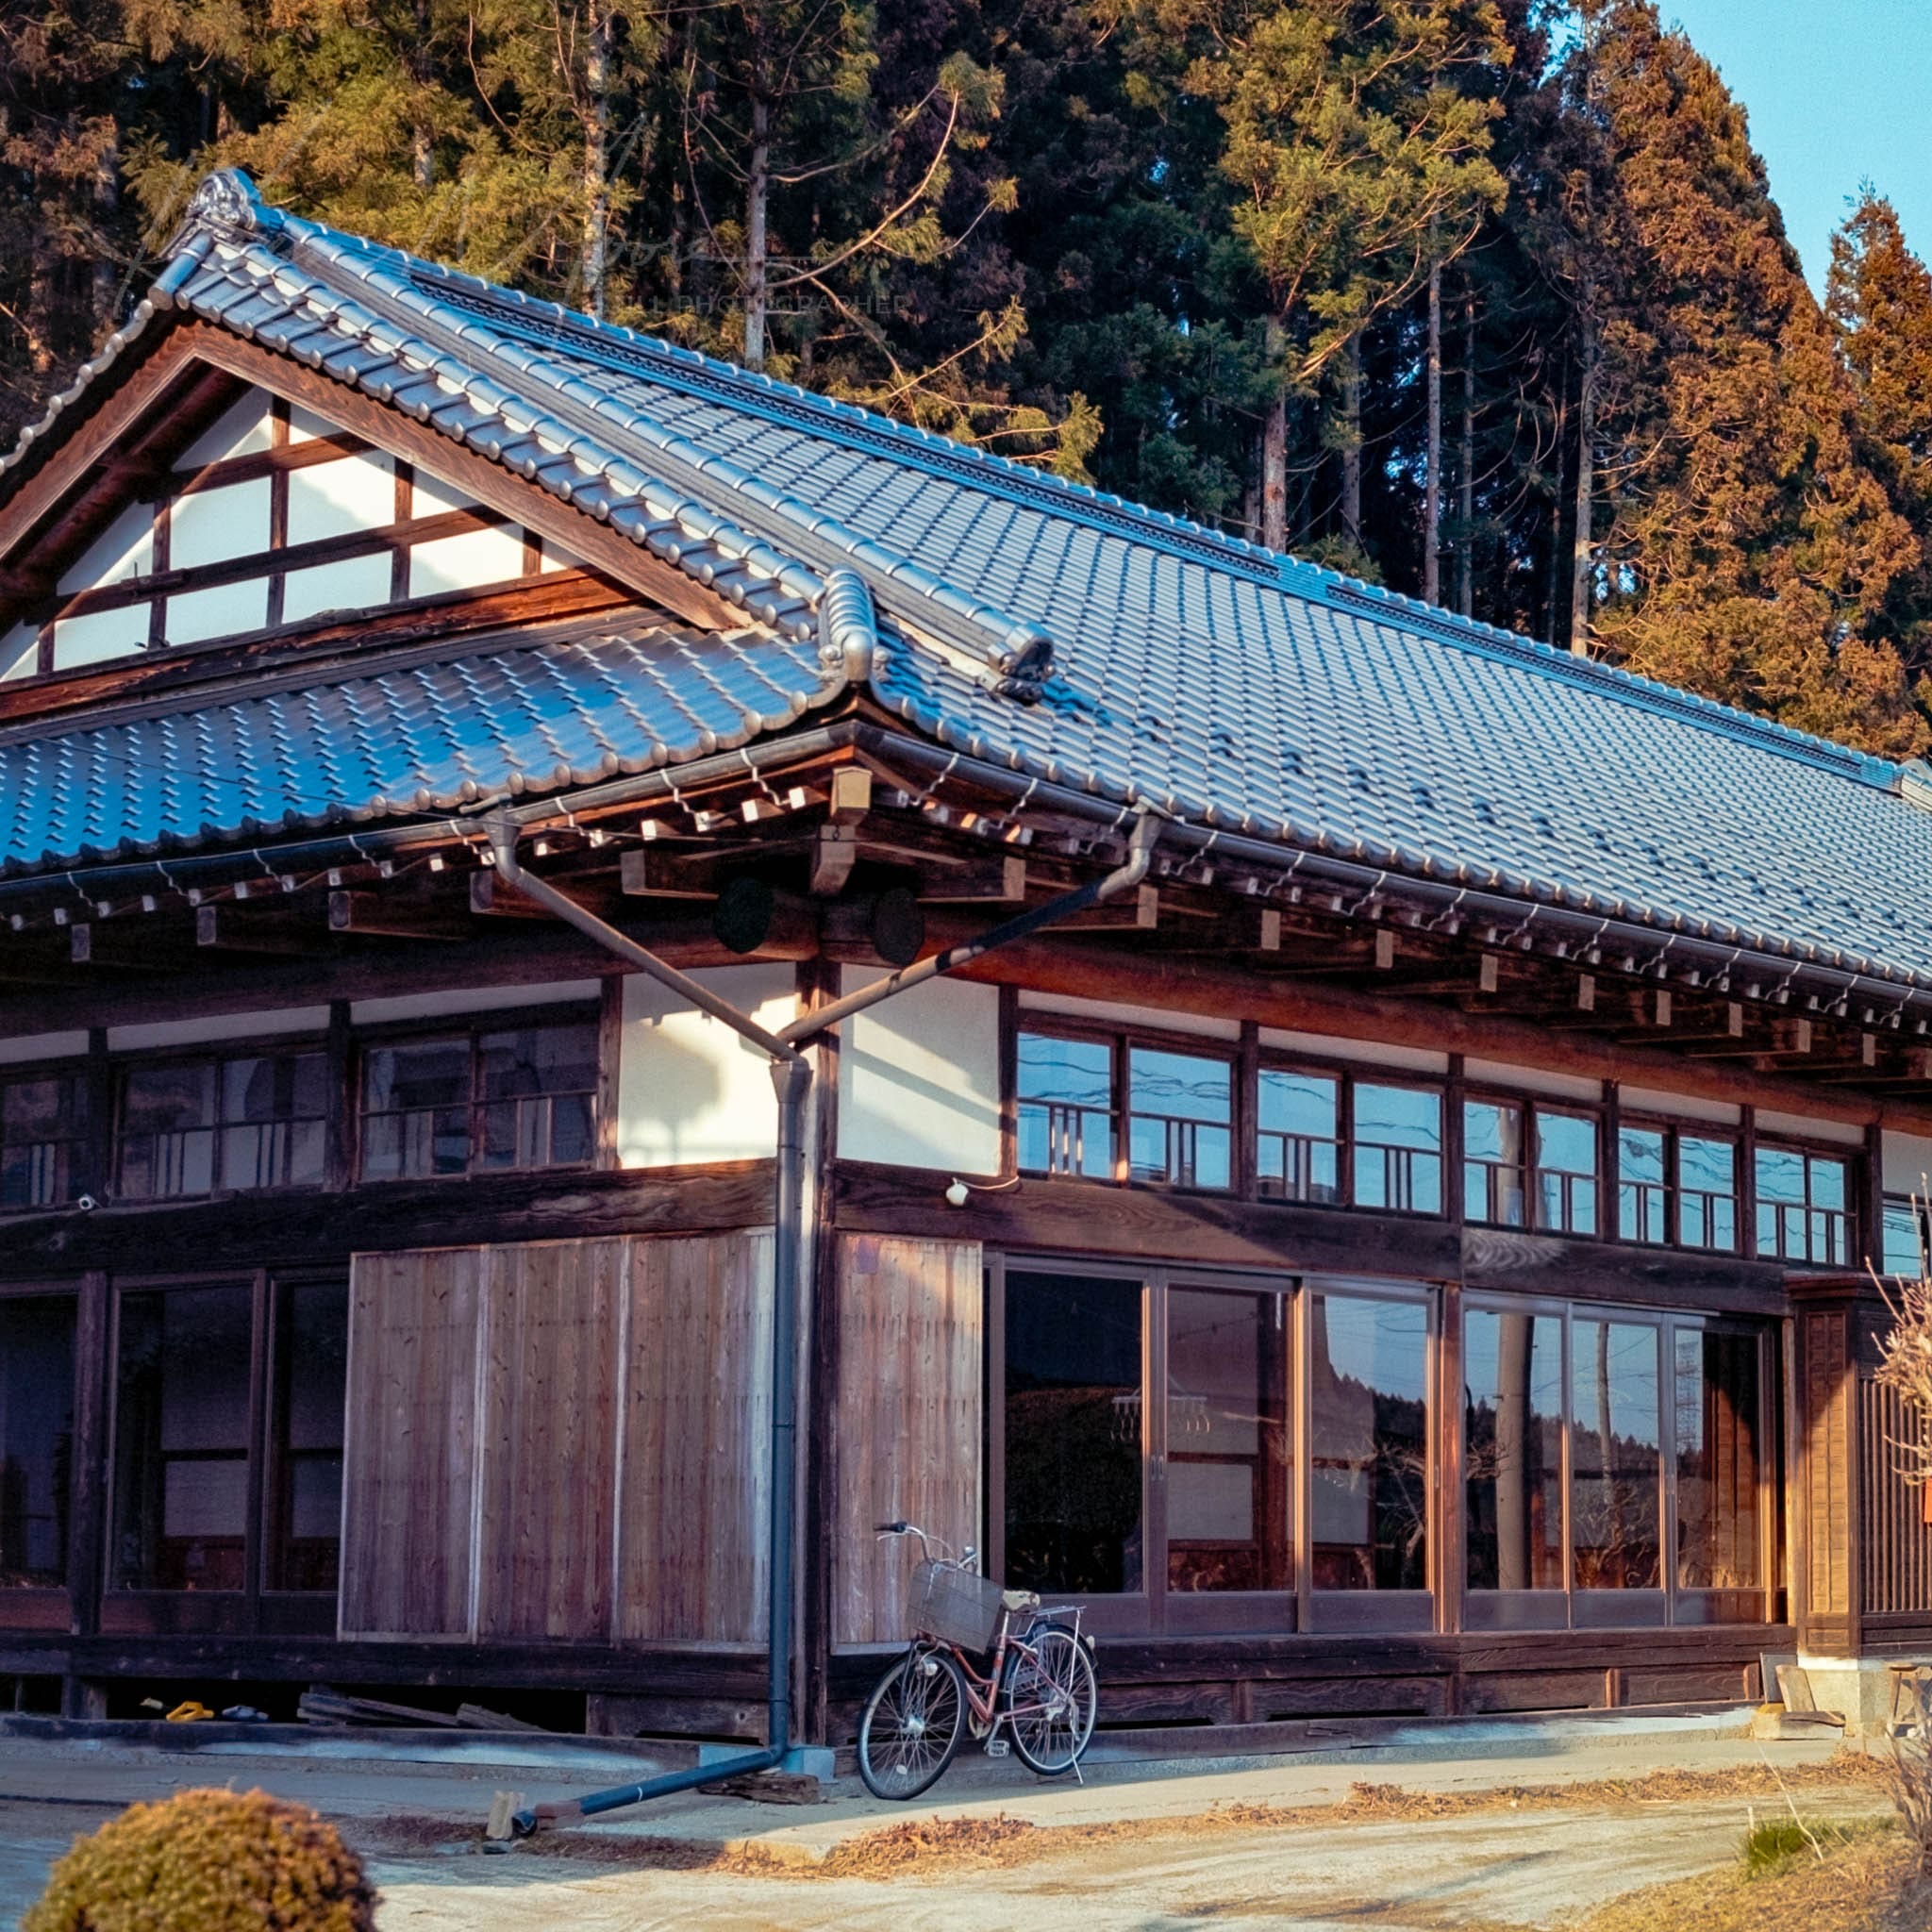 Traditional Japanese home at dusk, featuring rustic woodwork, large windows, and a solitary parked bicycle.